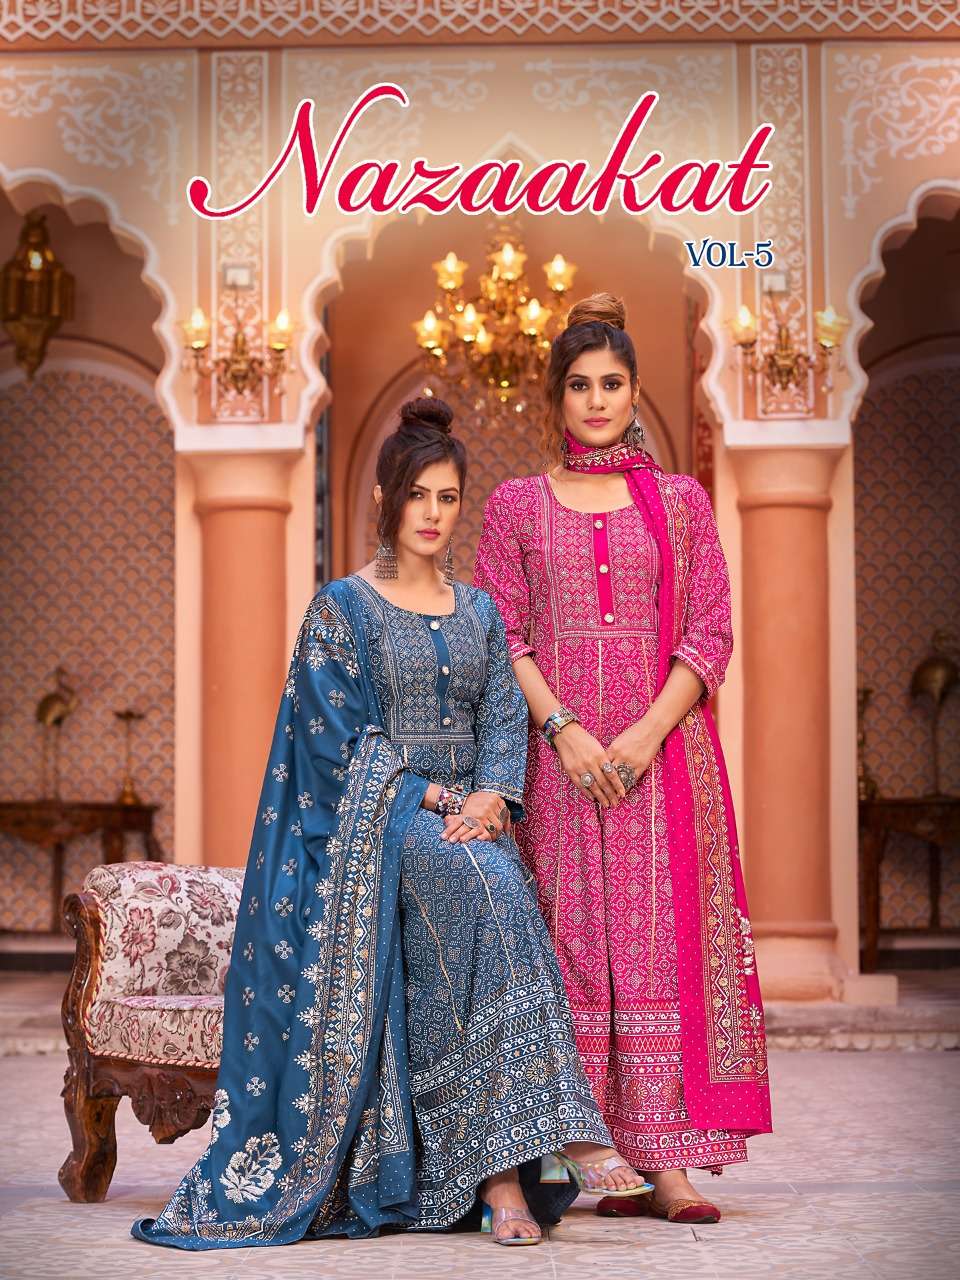 VIYAA DESIGNER NAZAAKAT VOL 5 NEW HEAVY FANCY DESIGNER PURE RAYON GOLD FOIL PRINTED FLAIR GOWN WITH DUPATTA FESTIVAL COLLECTION WHOLESALER 